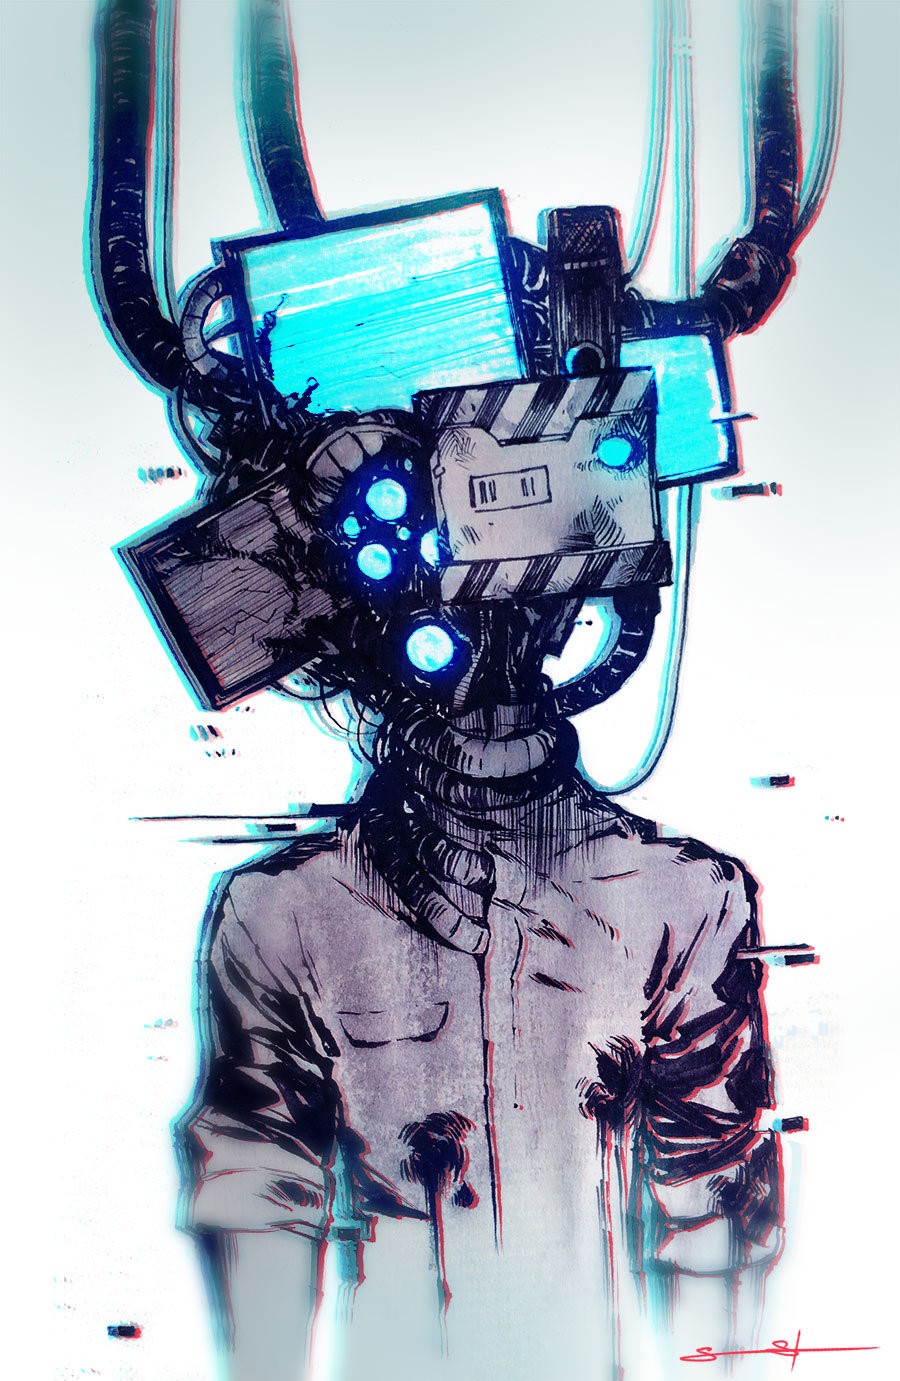 by monsterboysandrobots on tumblr